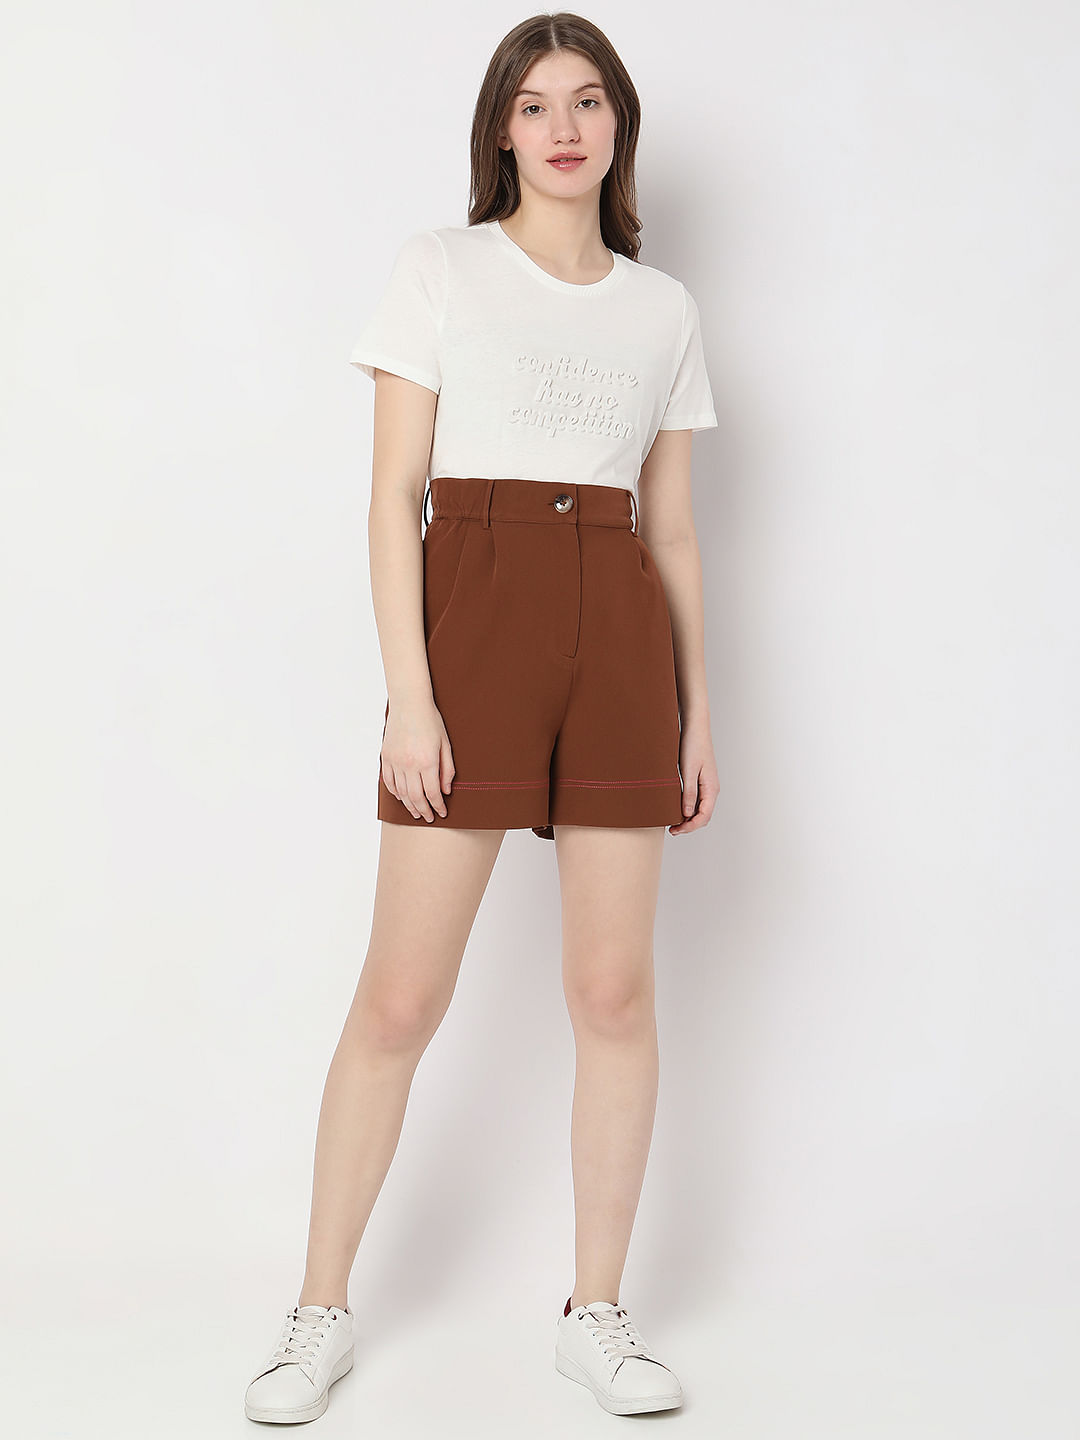 Brown shorts outfit on Pinterest